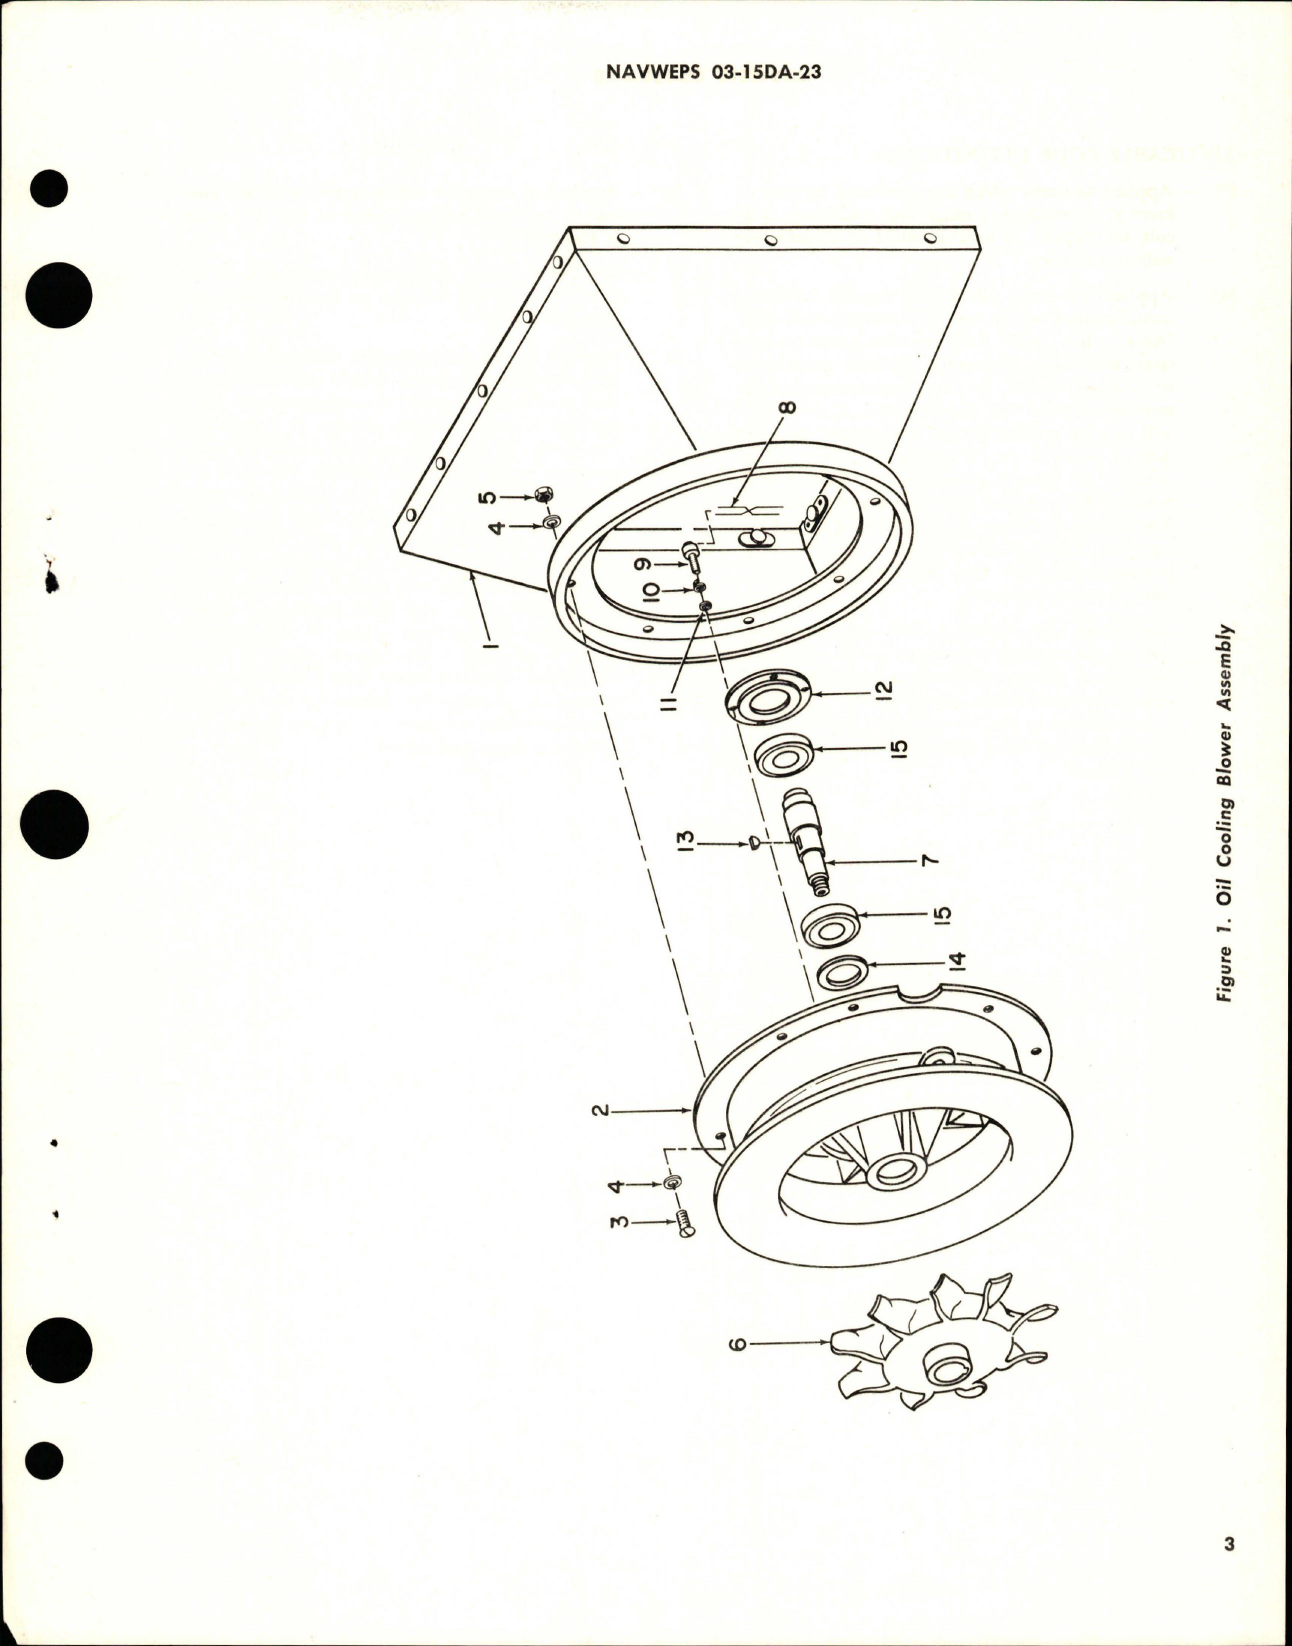 Sample page 5 from AirCorps Library document: Overhaul Instructions with Illustrated Parts Breakdown for Oil Cooling Blower Assembly - Model SVA-990-1508